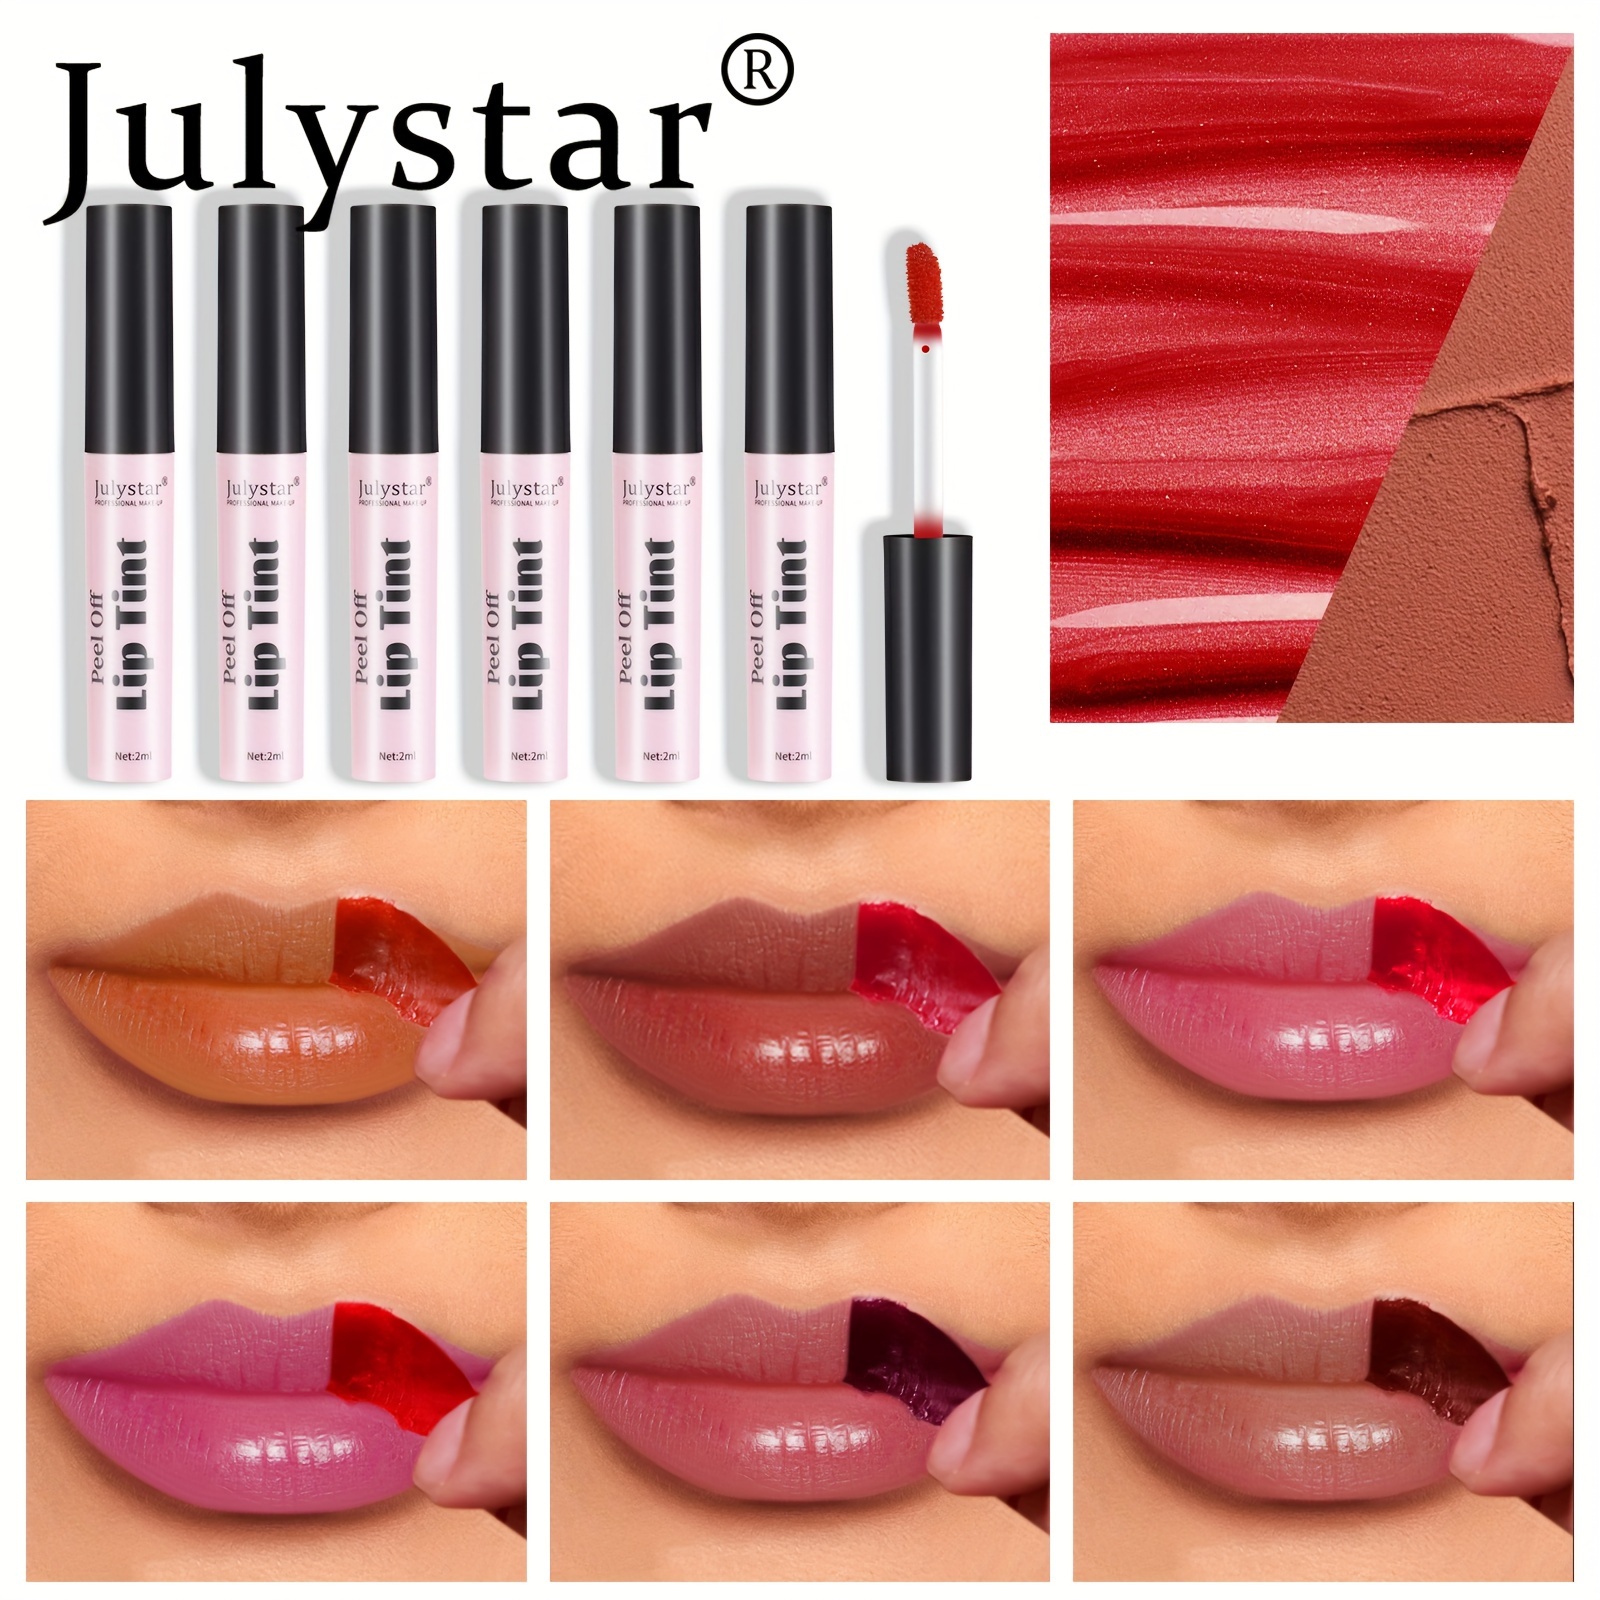 

Peel Off Lip Tint, Matte Finish, Long-lasting Waterproof Lipstick, Non-stick Cup Lip Stain Glaze, Assorted Colors